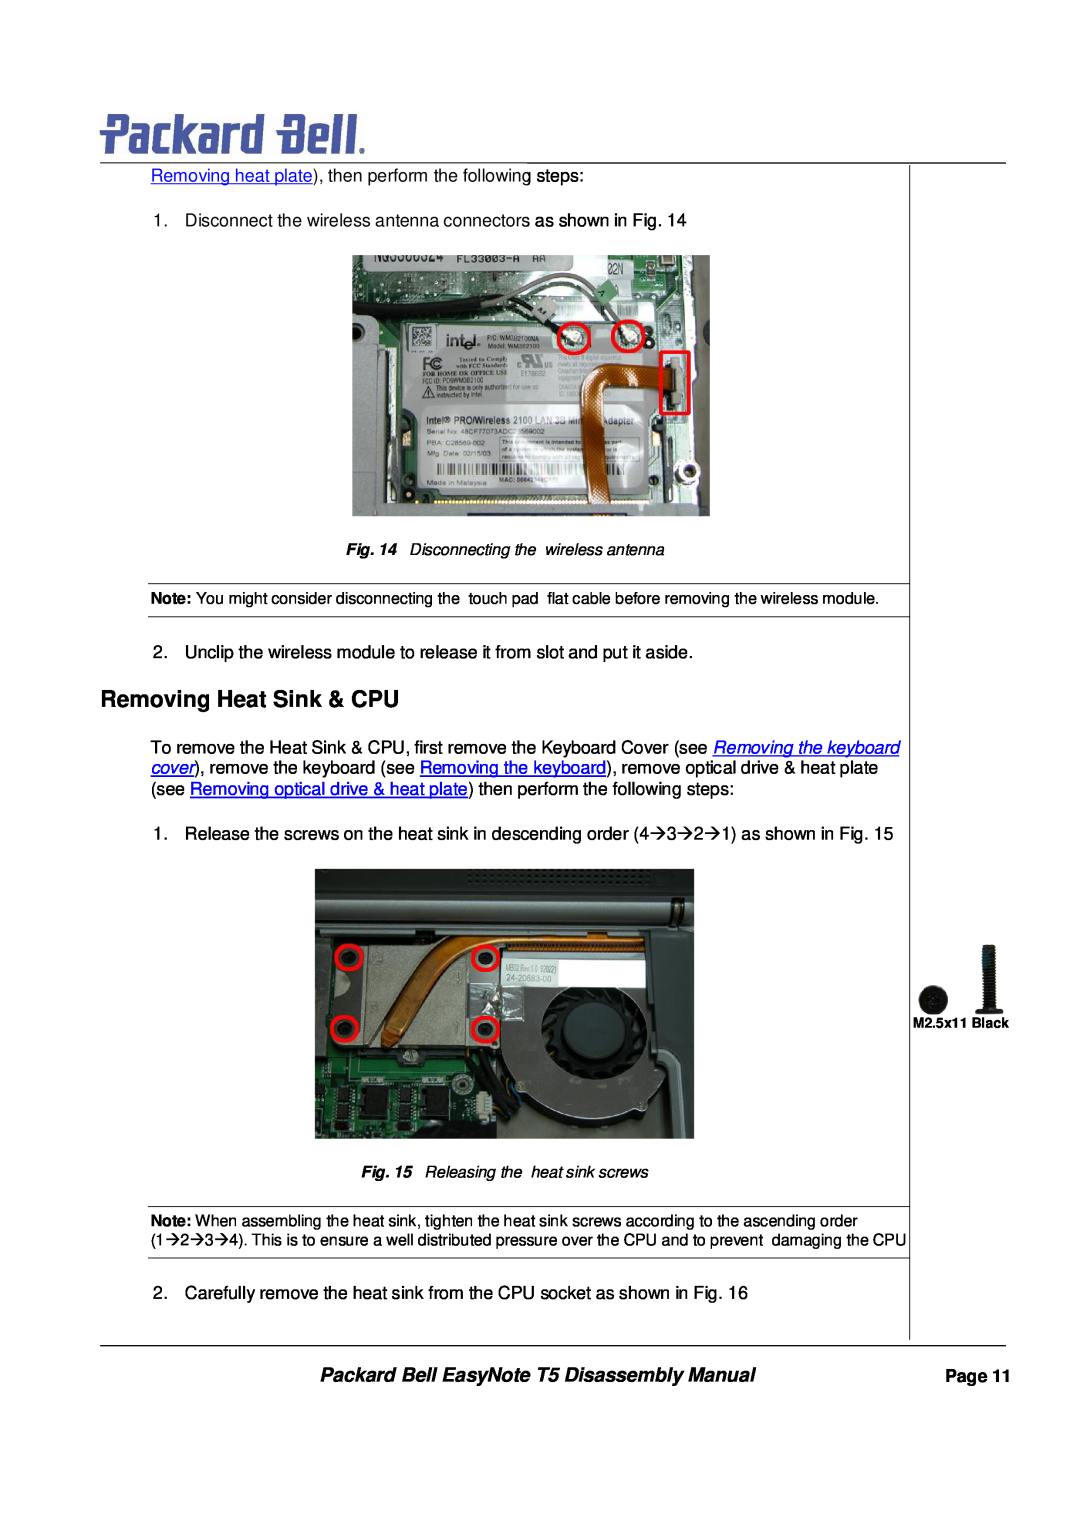 Packard Bell manual Removing Heat Sink & CPU, Packard Bell EasyNote T5 Disassembly Manual 